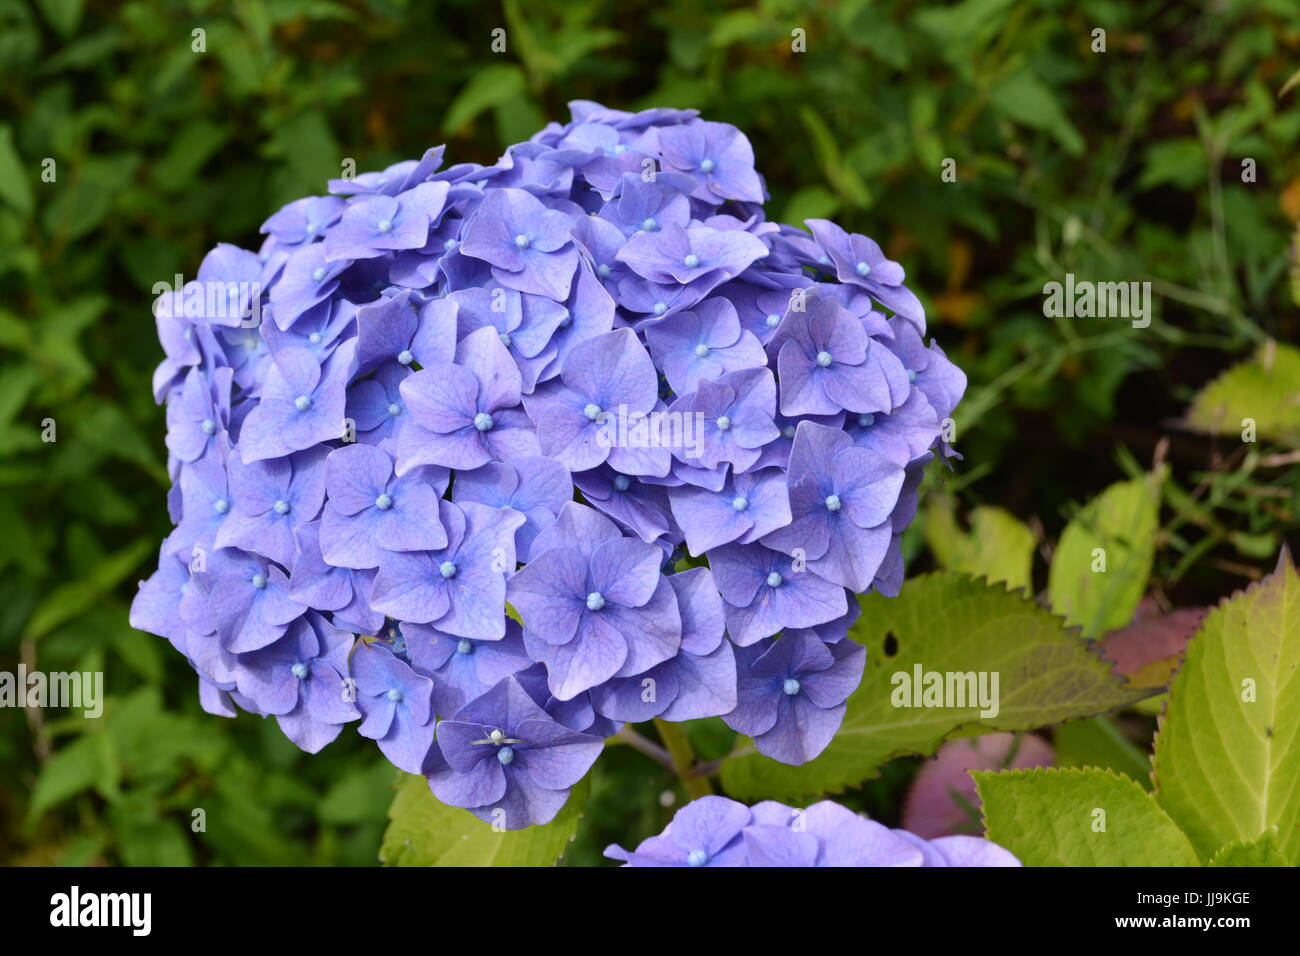 Close up of flowering hydrangea plant in english garden setting Stock Photo